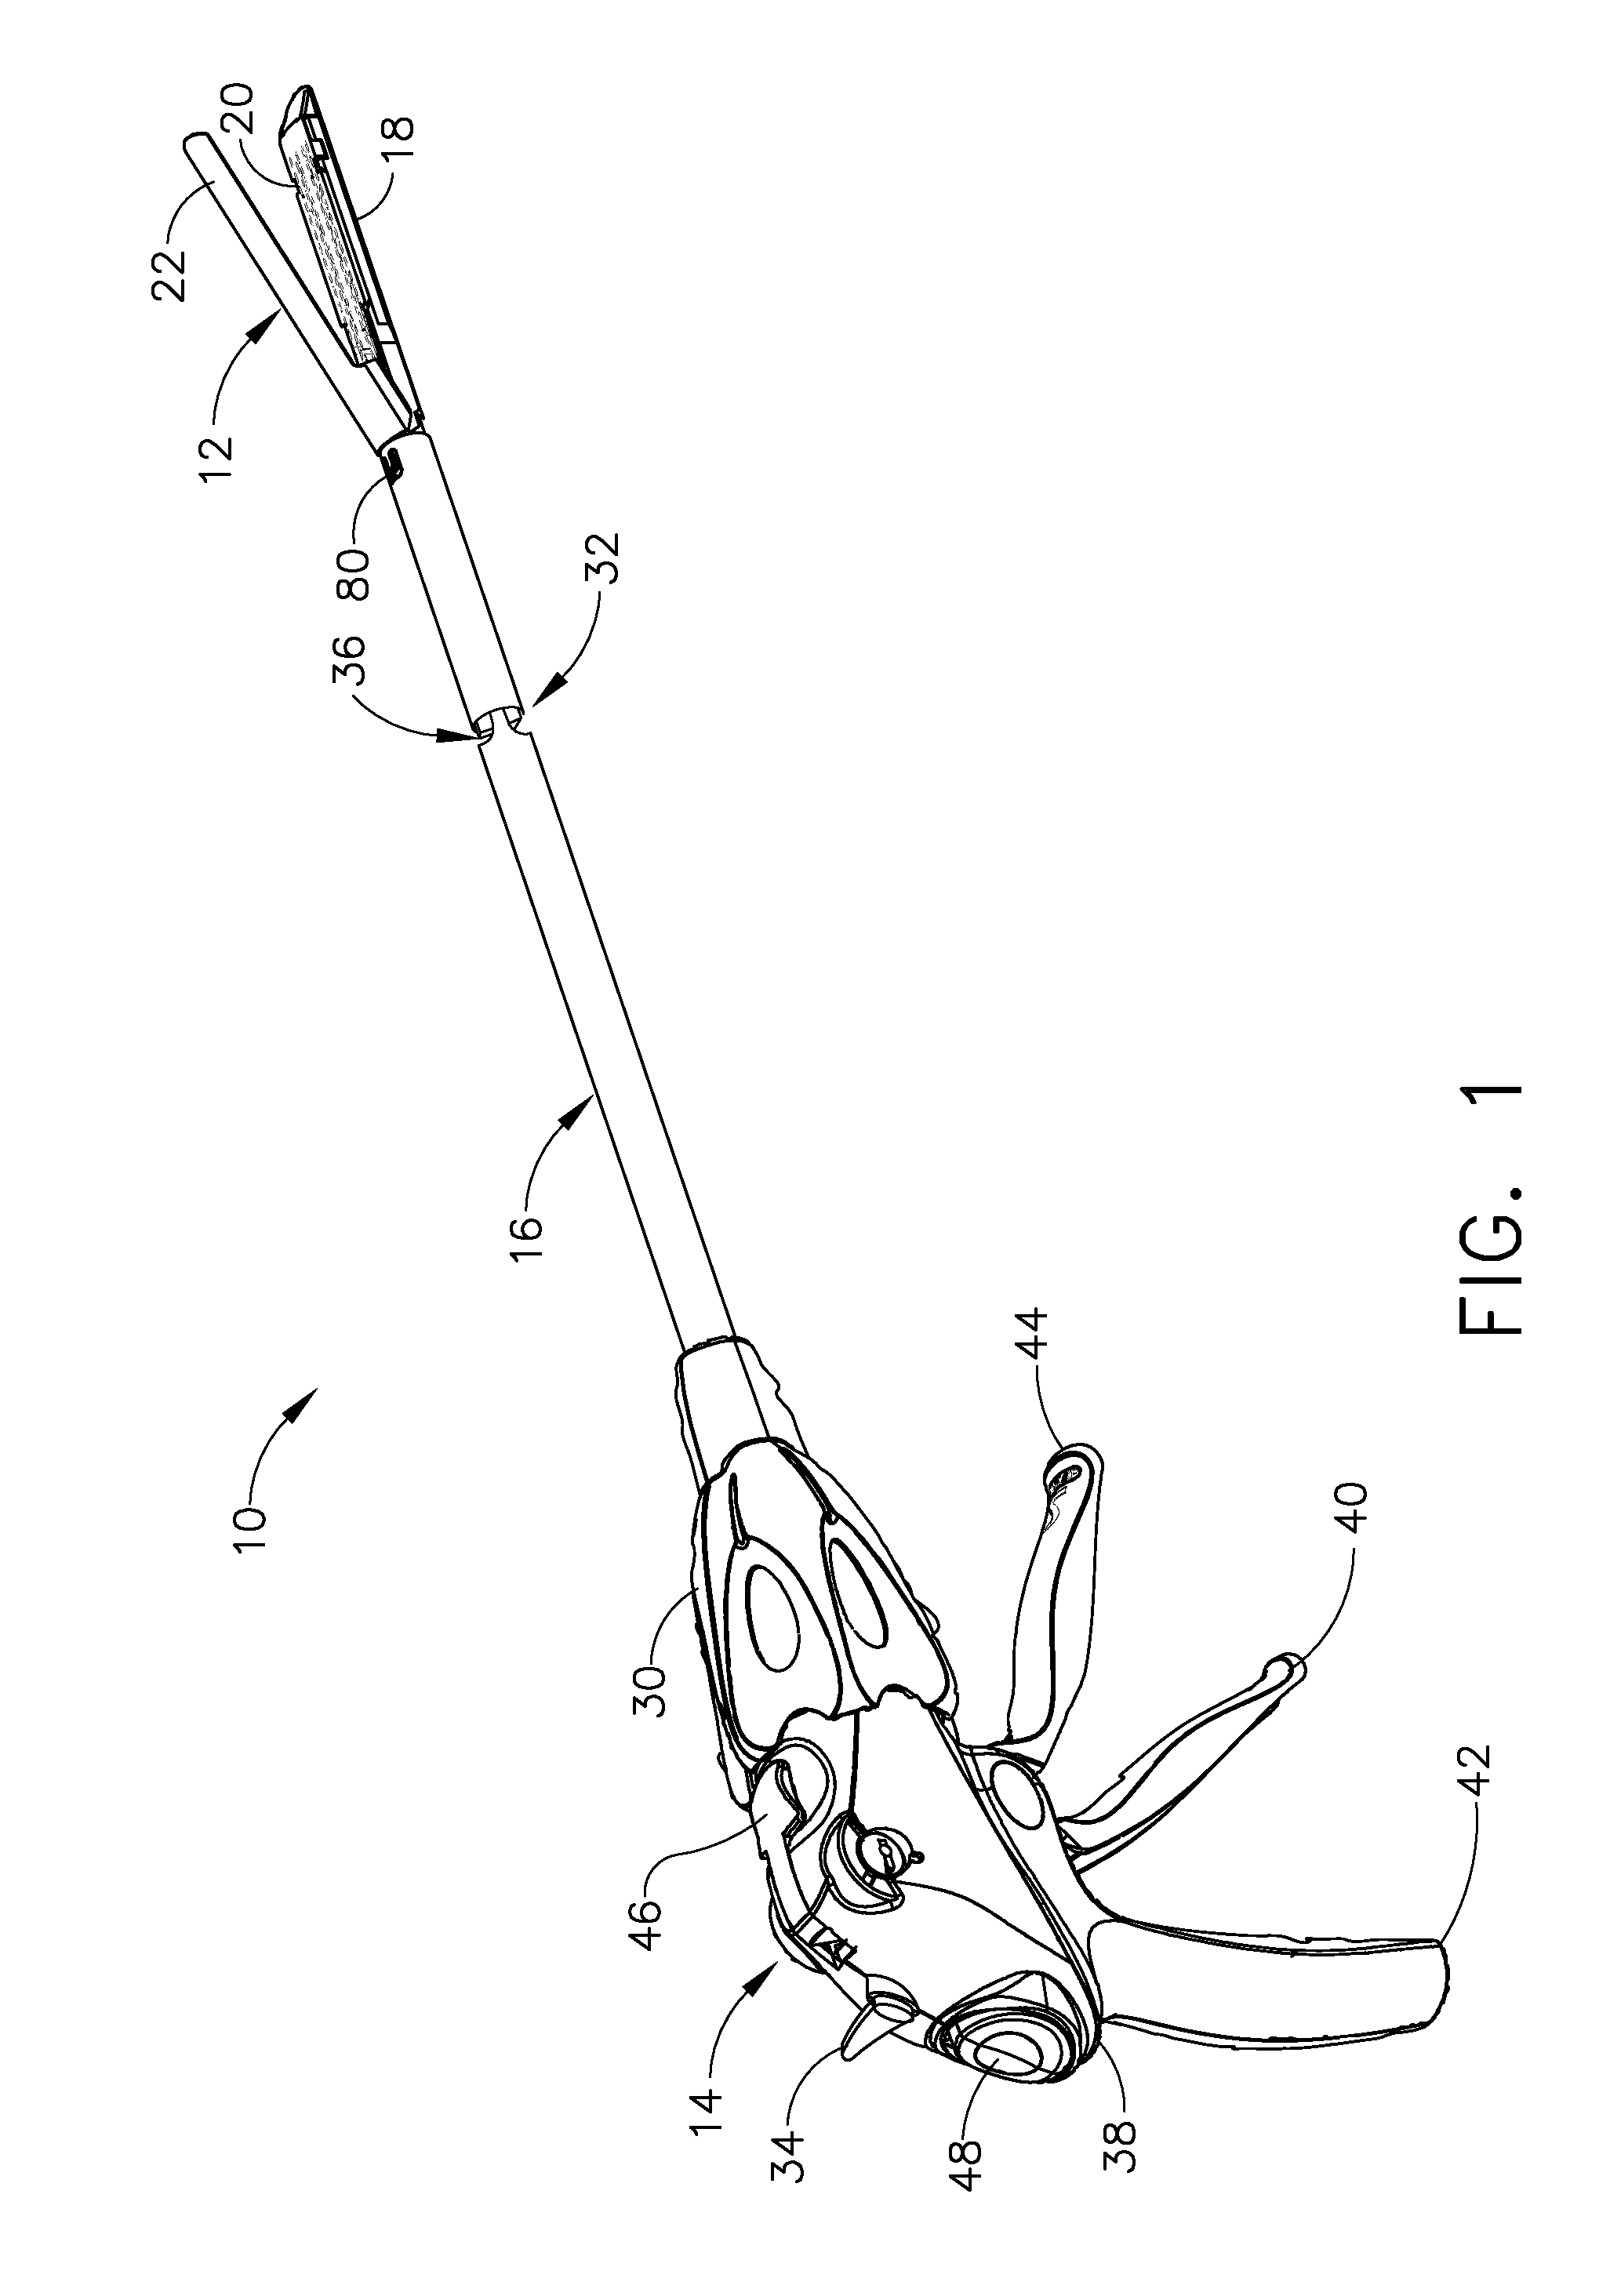 Robotically-driven surgical instrument with e-beam driver